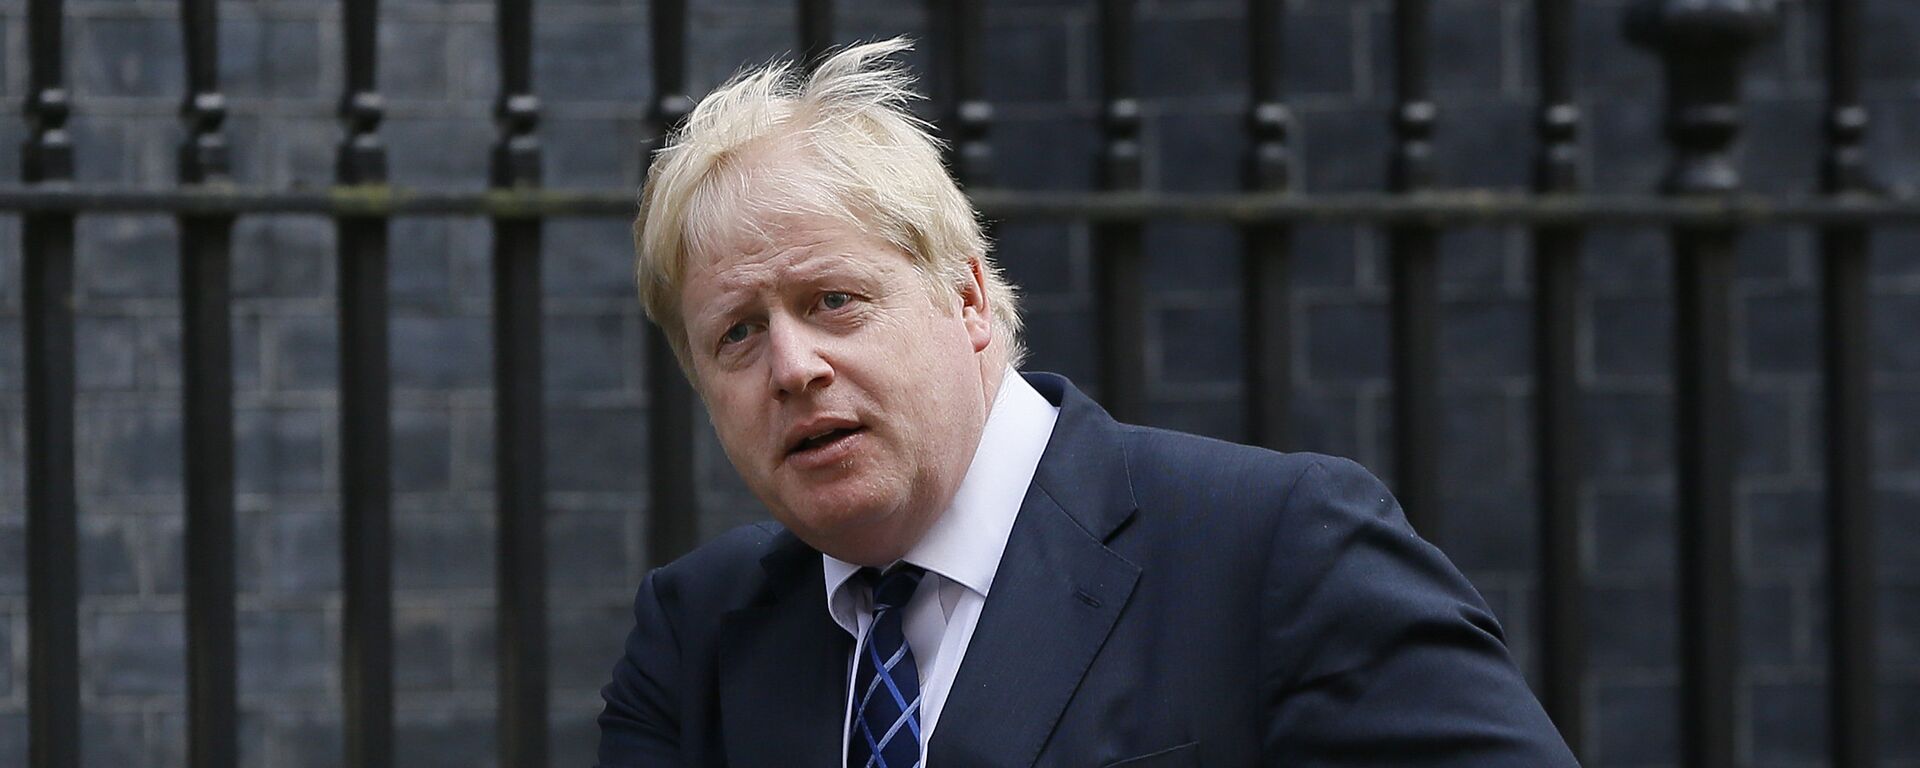 Boris Johnson, the Mayor of London arrives for a meeting at Downing Street in London, Tuesday, March 22, 2016 - Sputnik Mundo, 1920, 05.11.2021